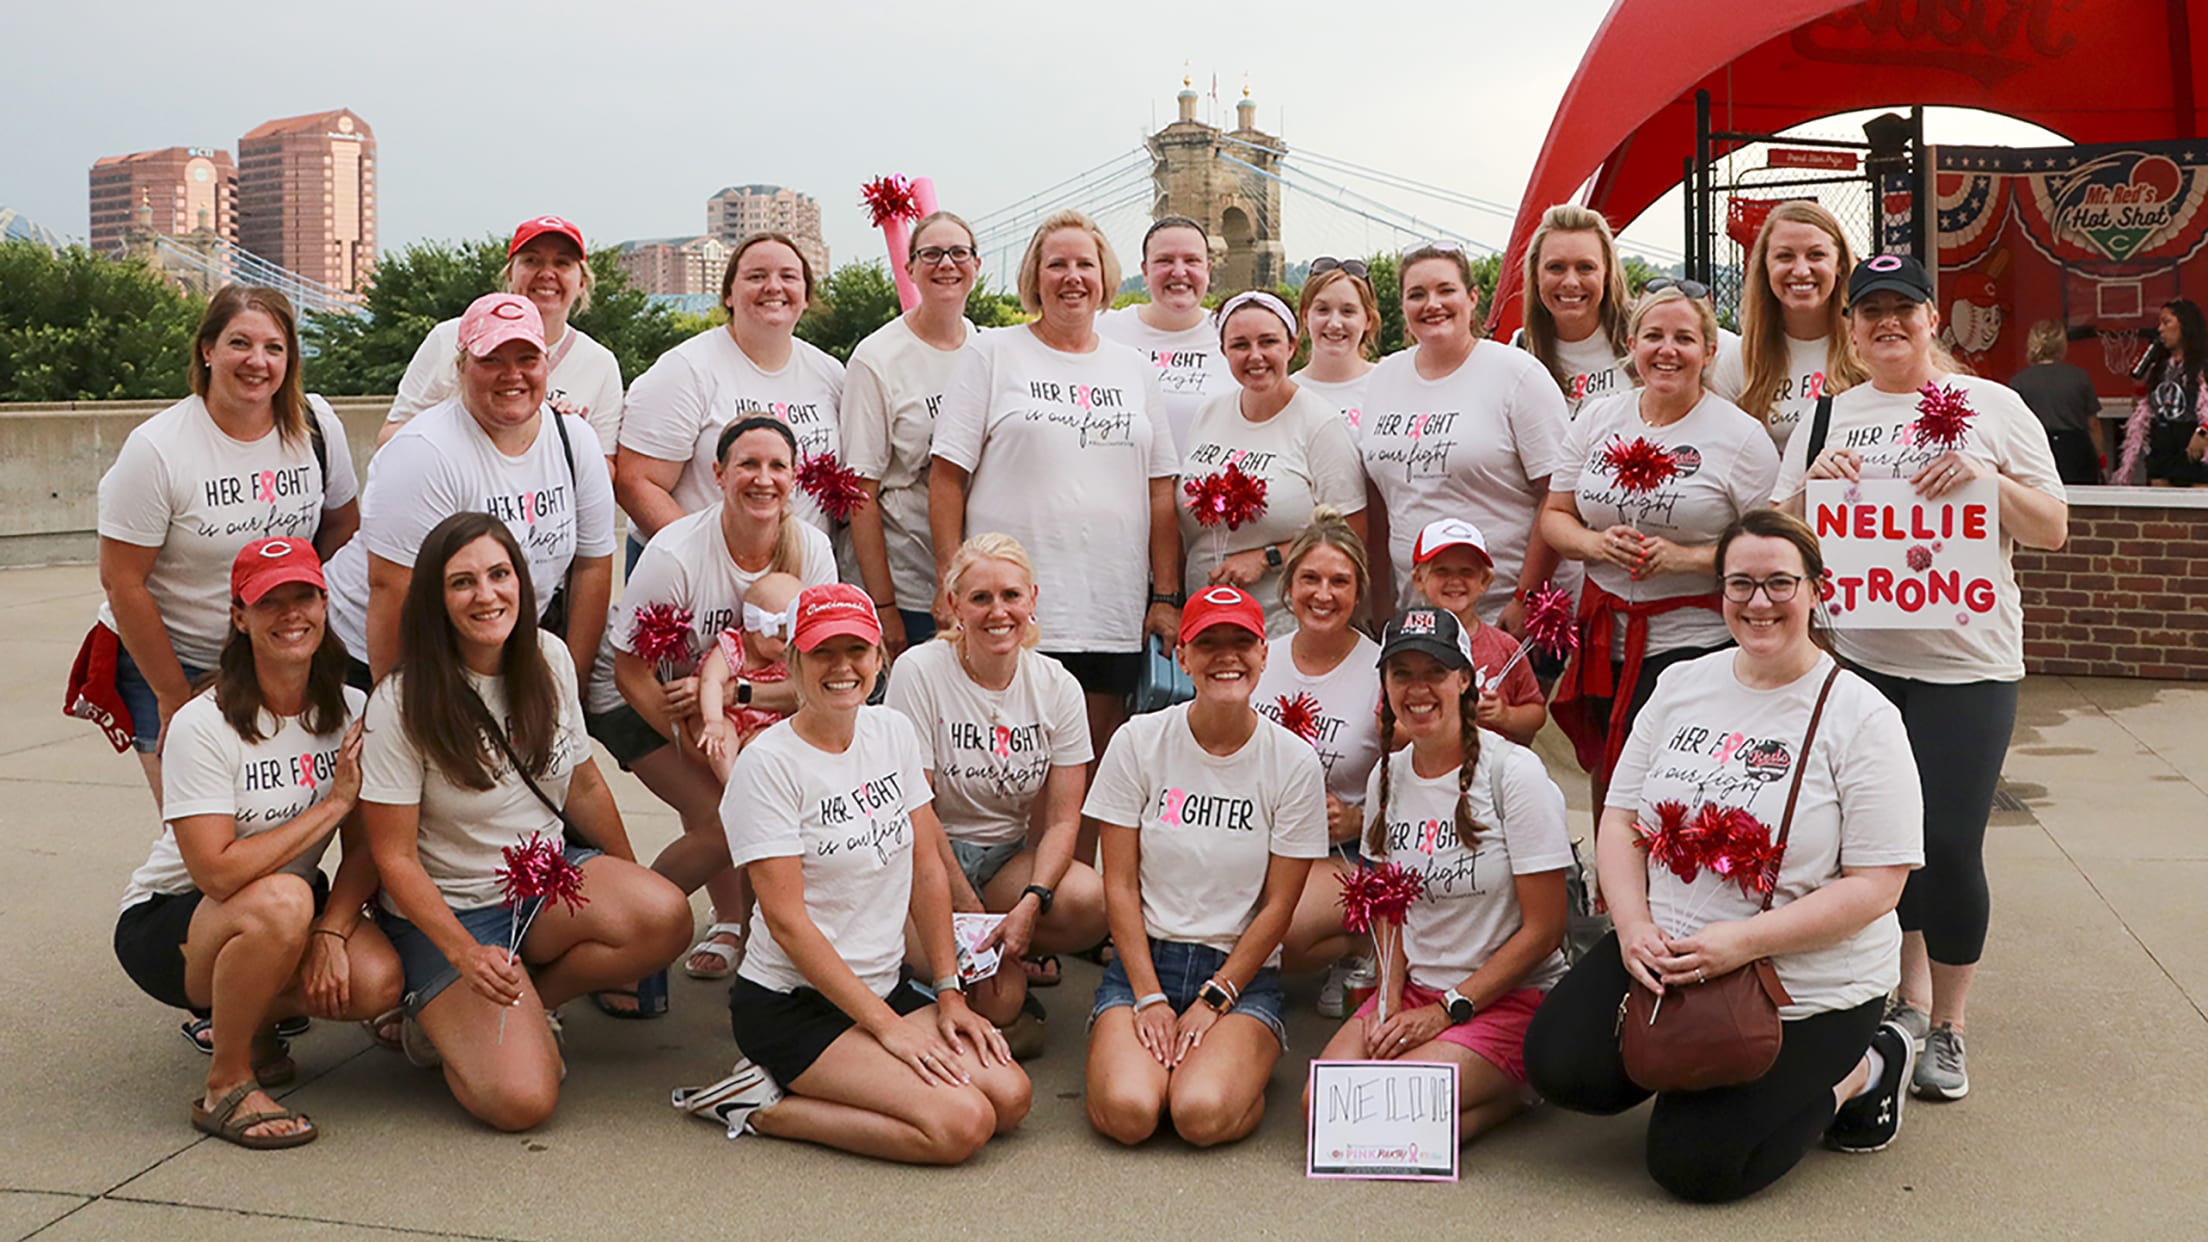 Cincinnati Reds on X: Greater Cincinnati's cancer care, support and  survivor communities will come together at today's game to Knock Cancer Out  of the Park. Before the game, join us from 1:00-3:30